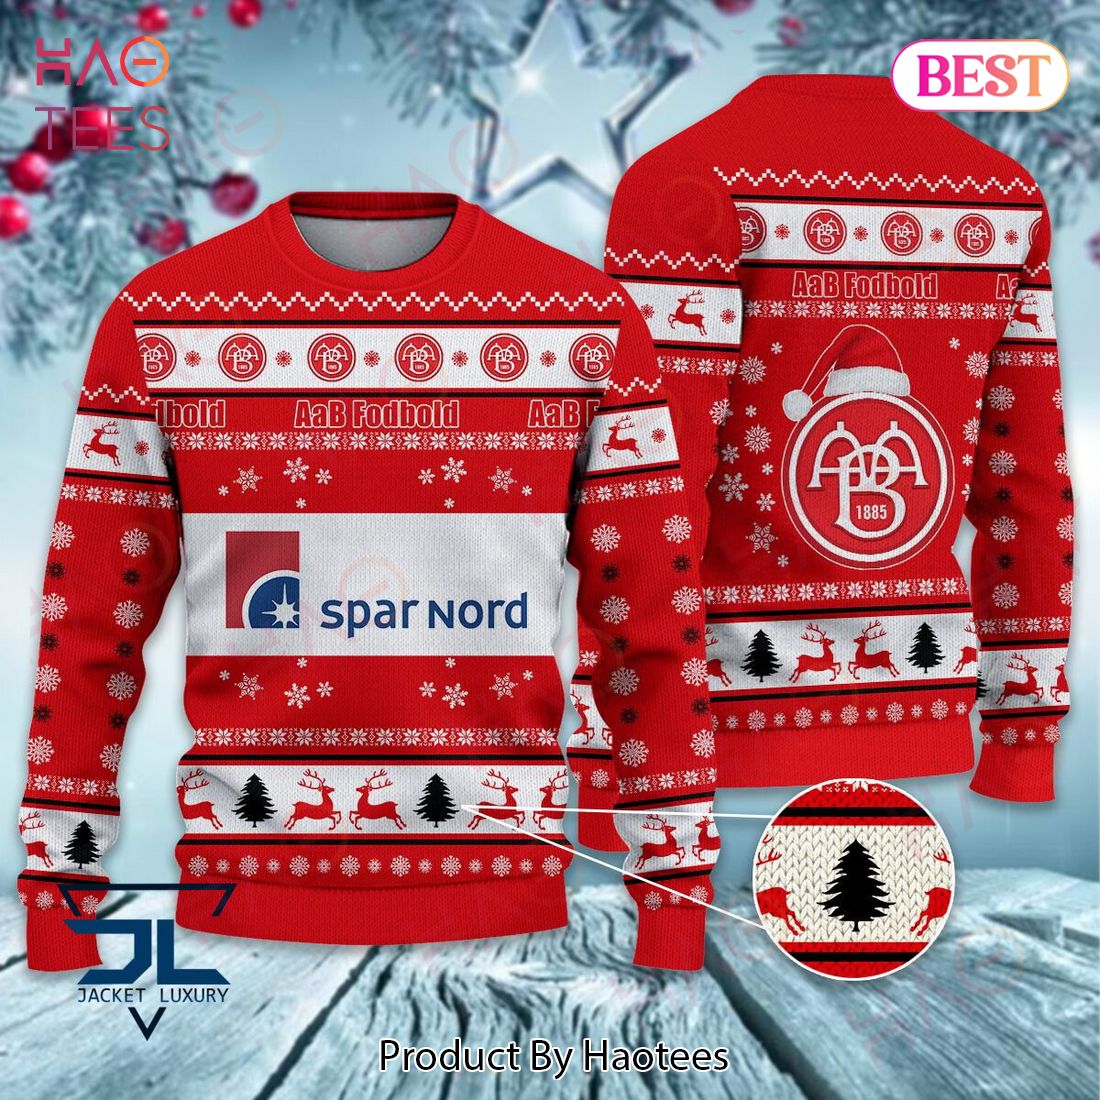 AaB Fodbold Spar Nord Luxury Brand Sweater Limited Edition